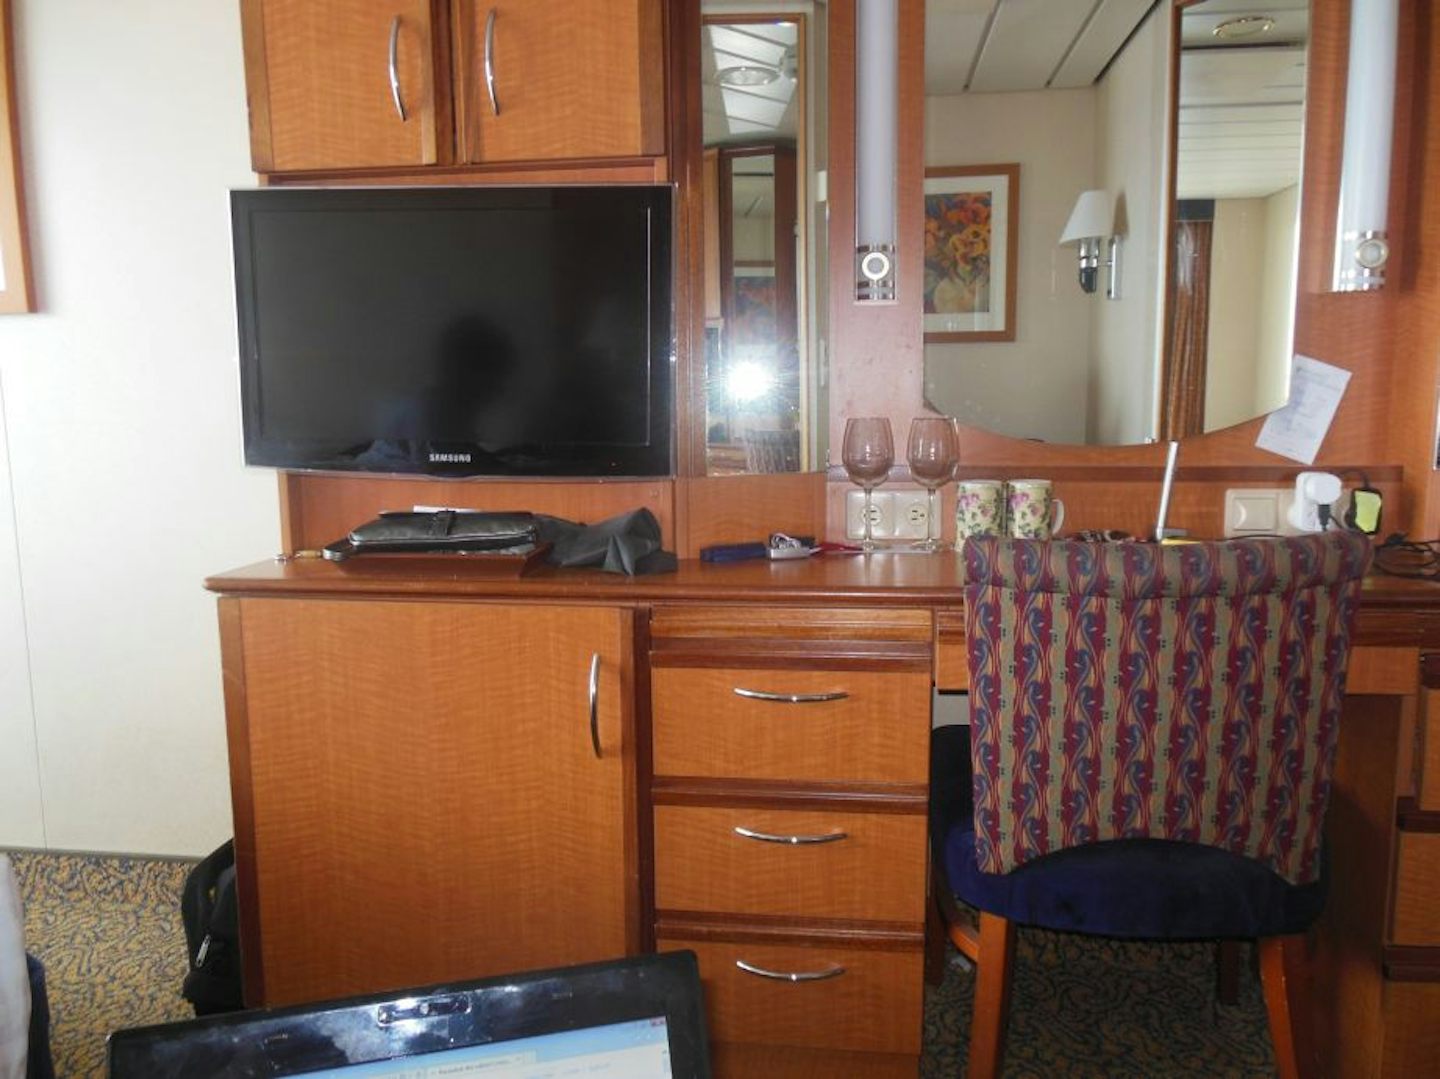 There are plenty of cabin photos on any RCI website.